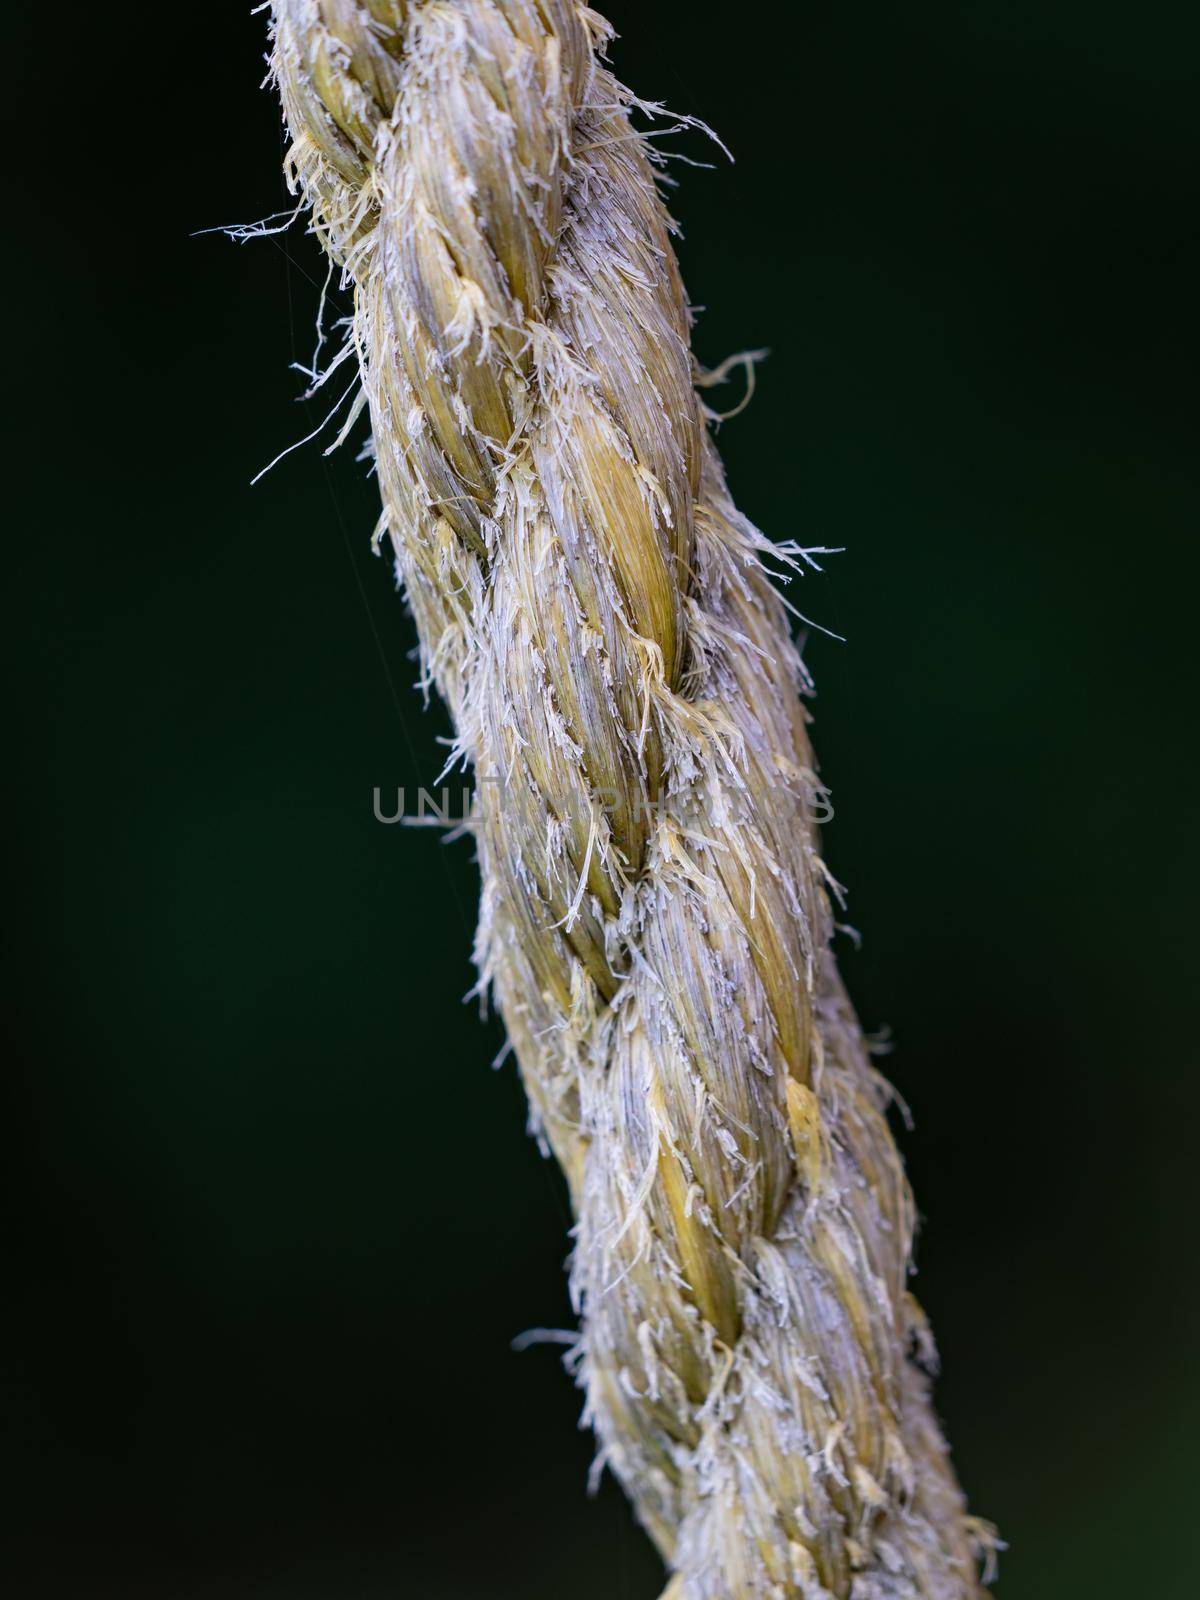 Close up on the braided strands of a rope made of natural material, sisal or hemp fibres on greel blurry background